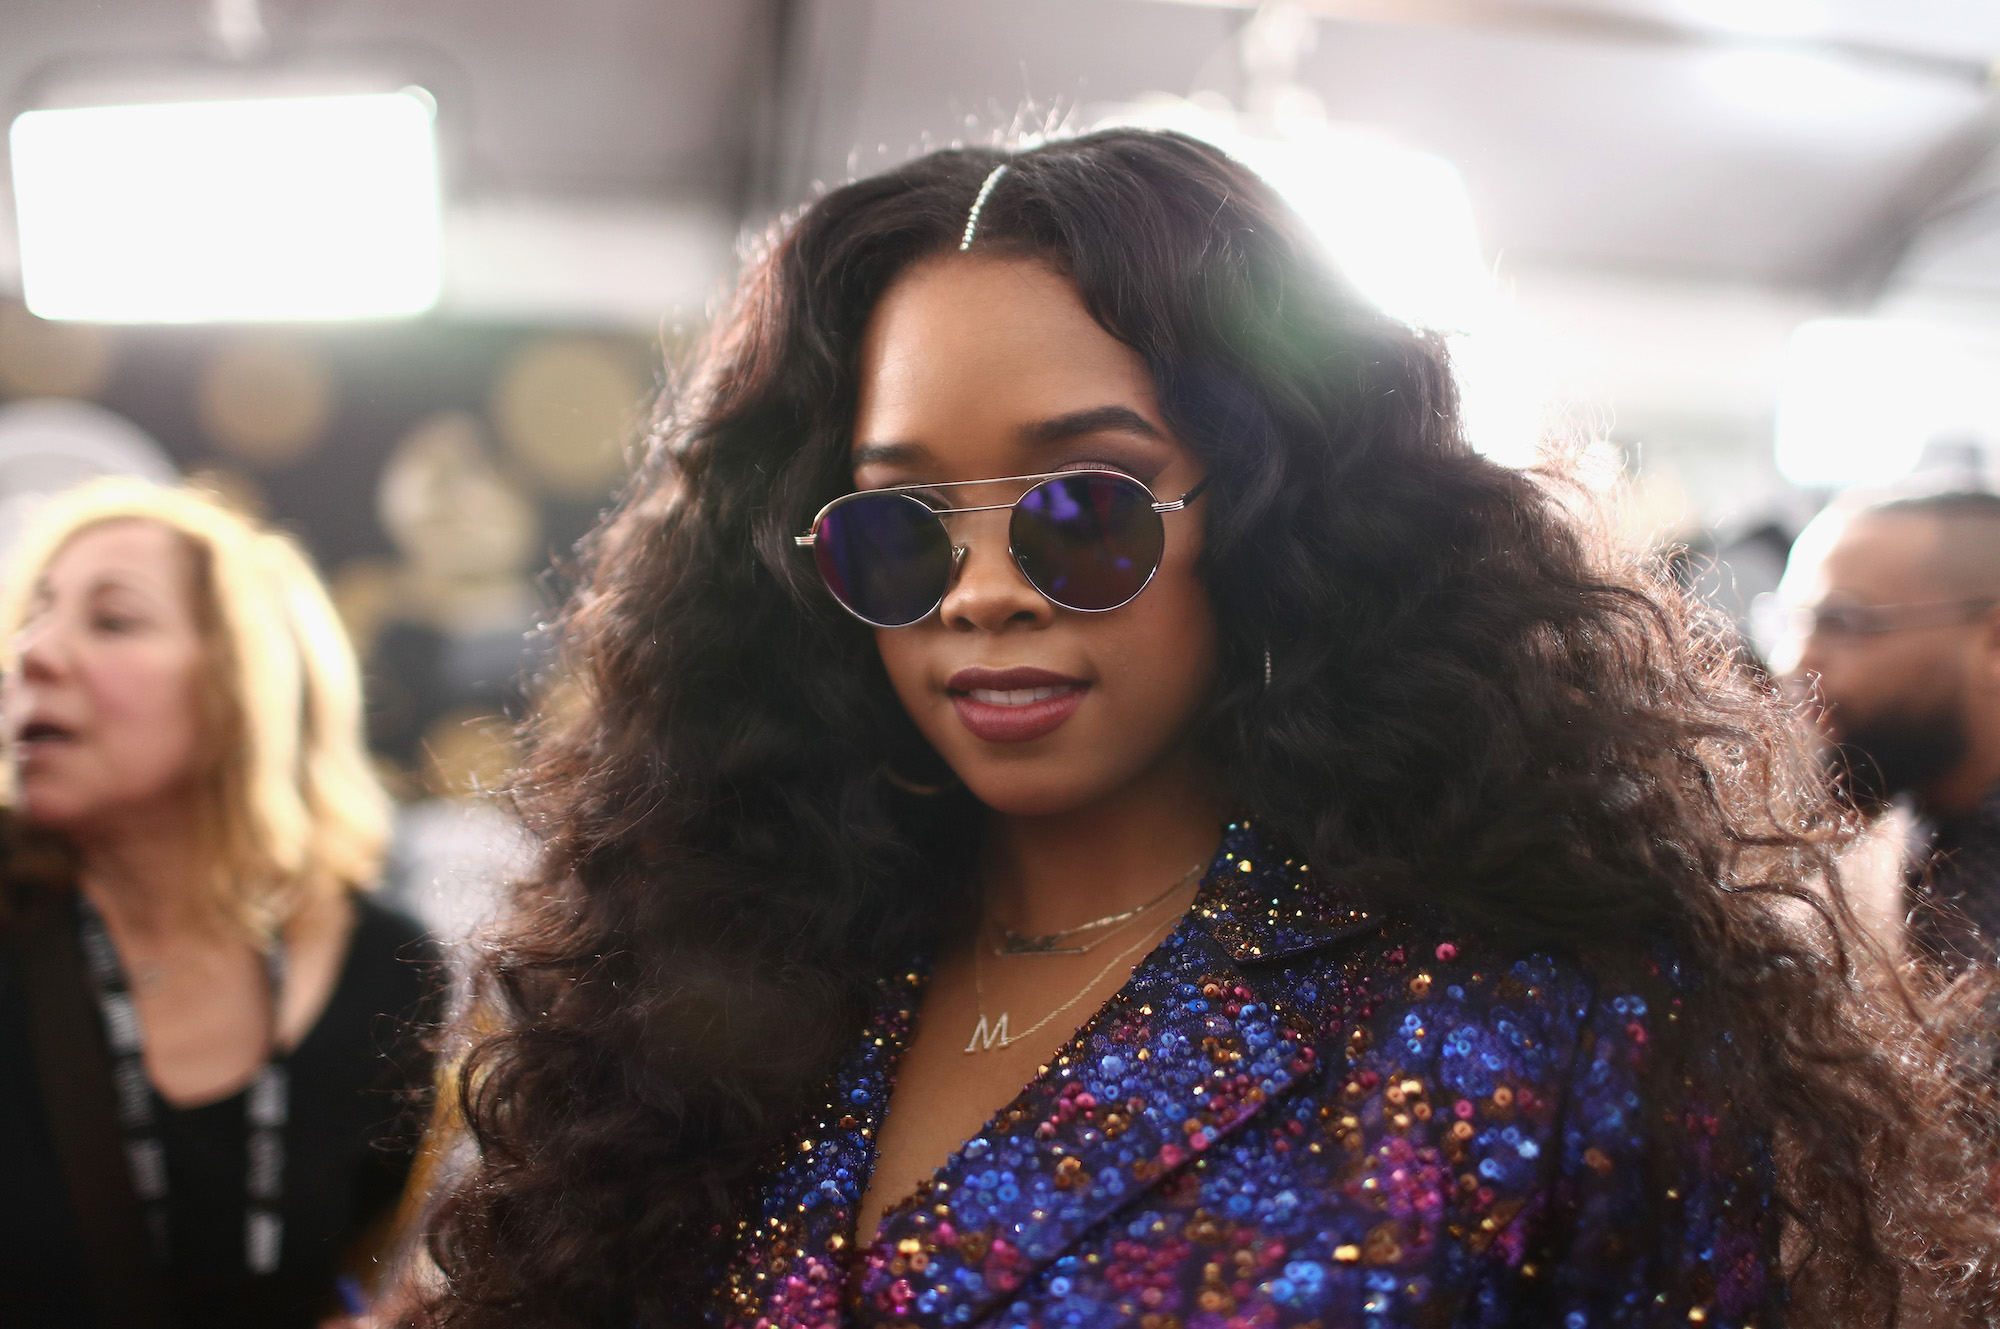 H.E.R. smiling, wearing sunglasses, in front of a blurred crowd